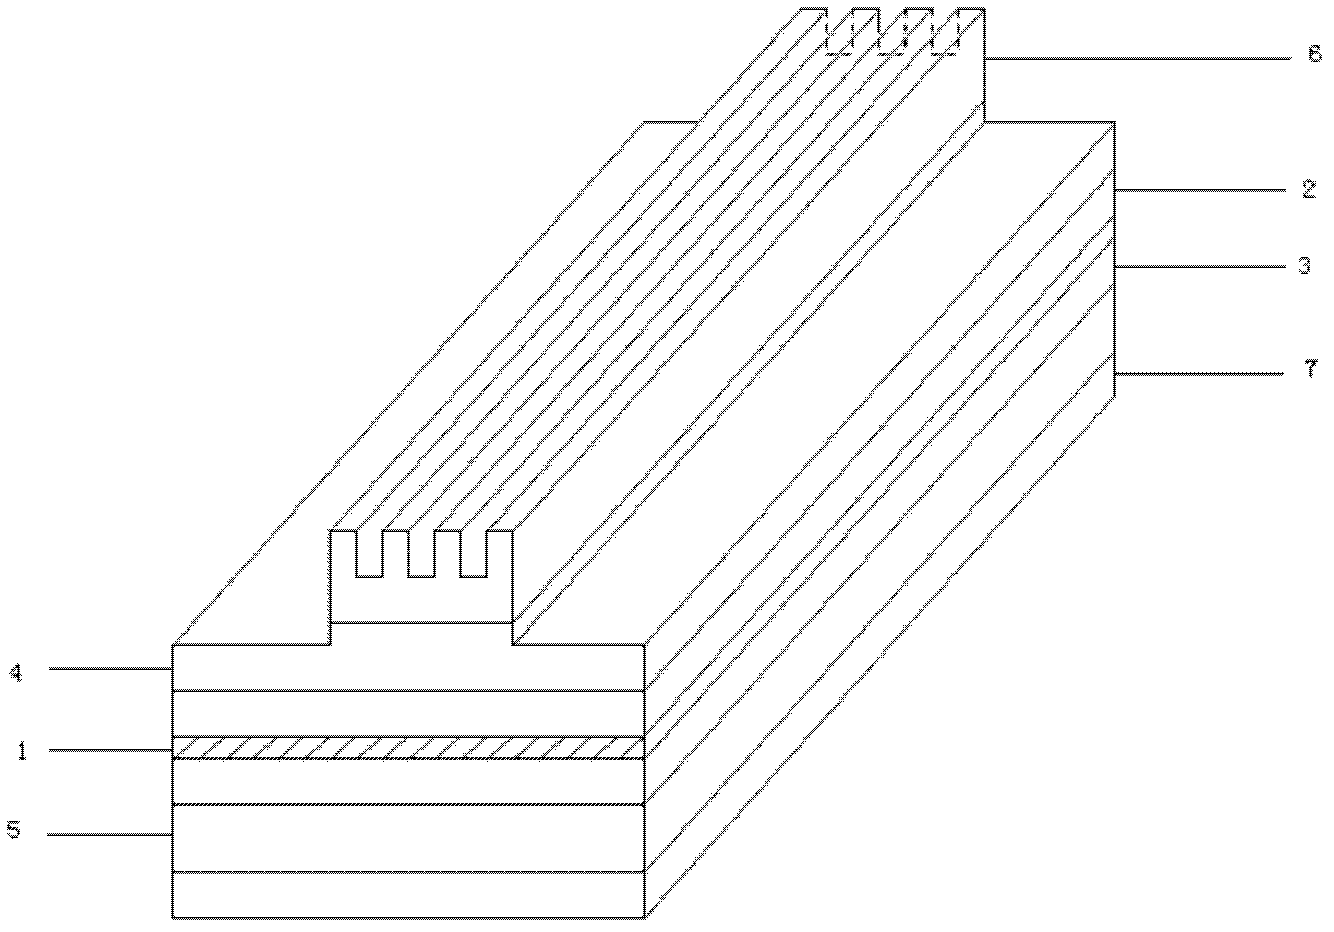 Edge-emitting diode semiconductor laser with raster structure